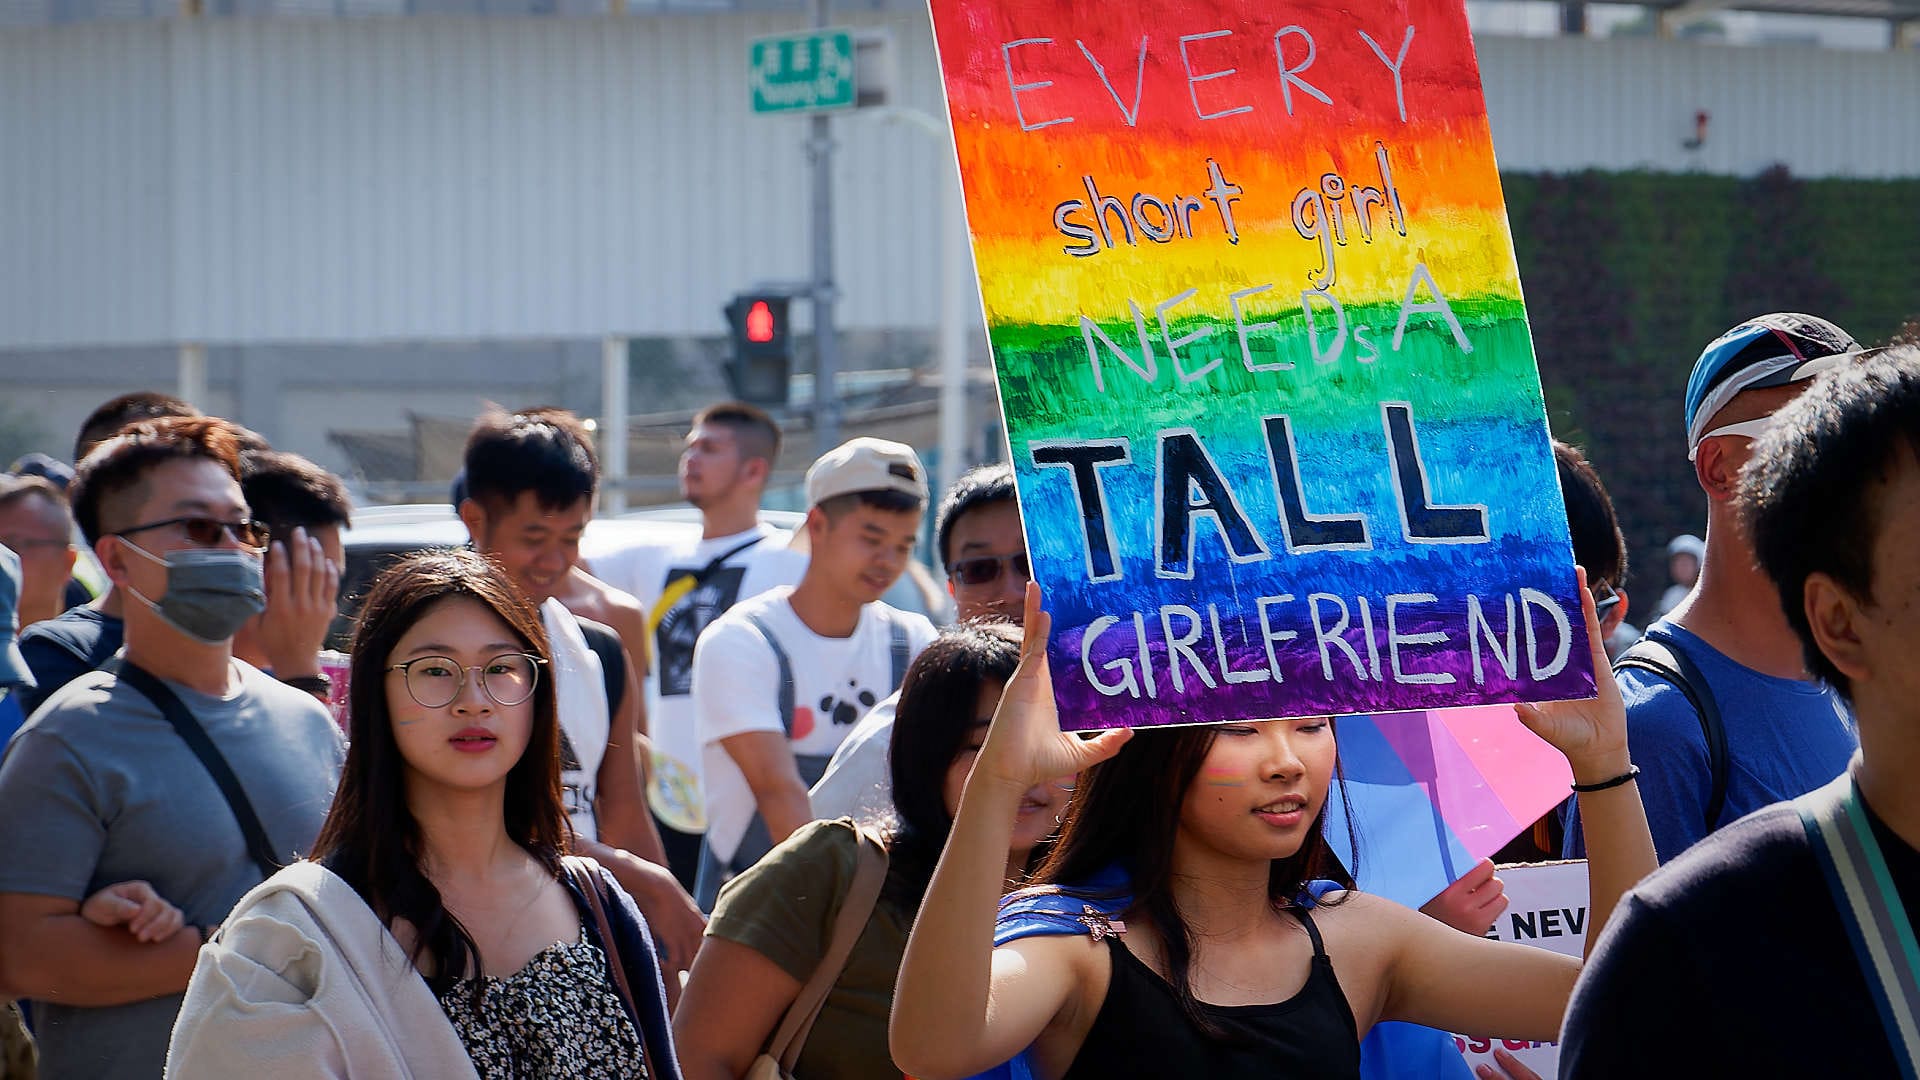 Woman in the Kaohsiung Pride Parade holding a colorful sign that says “Every short girl needs a tall girlfriend”.